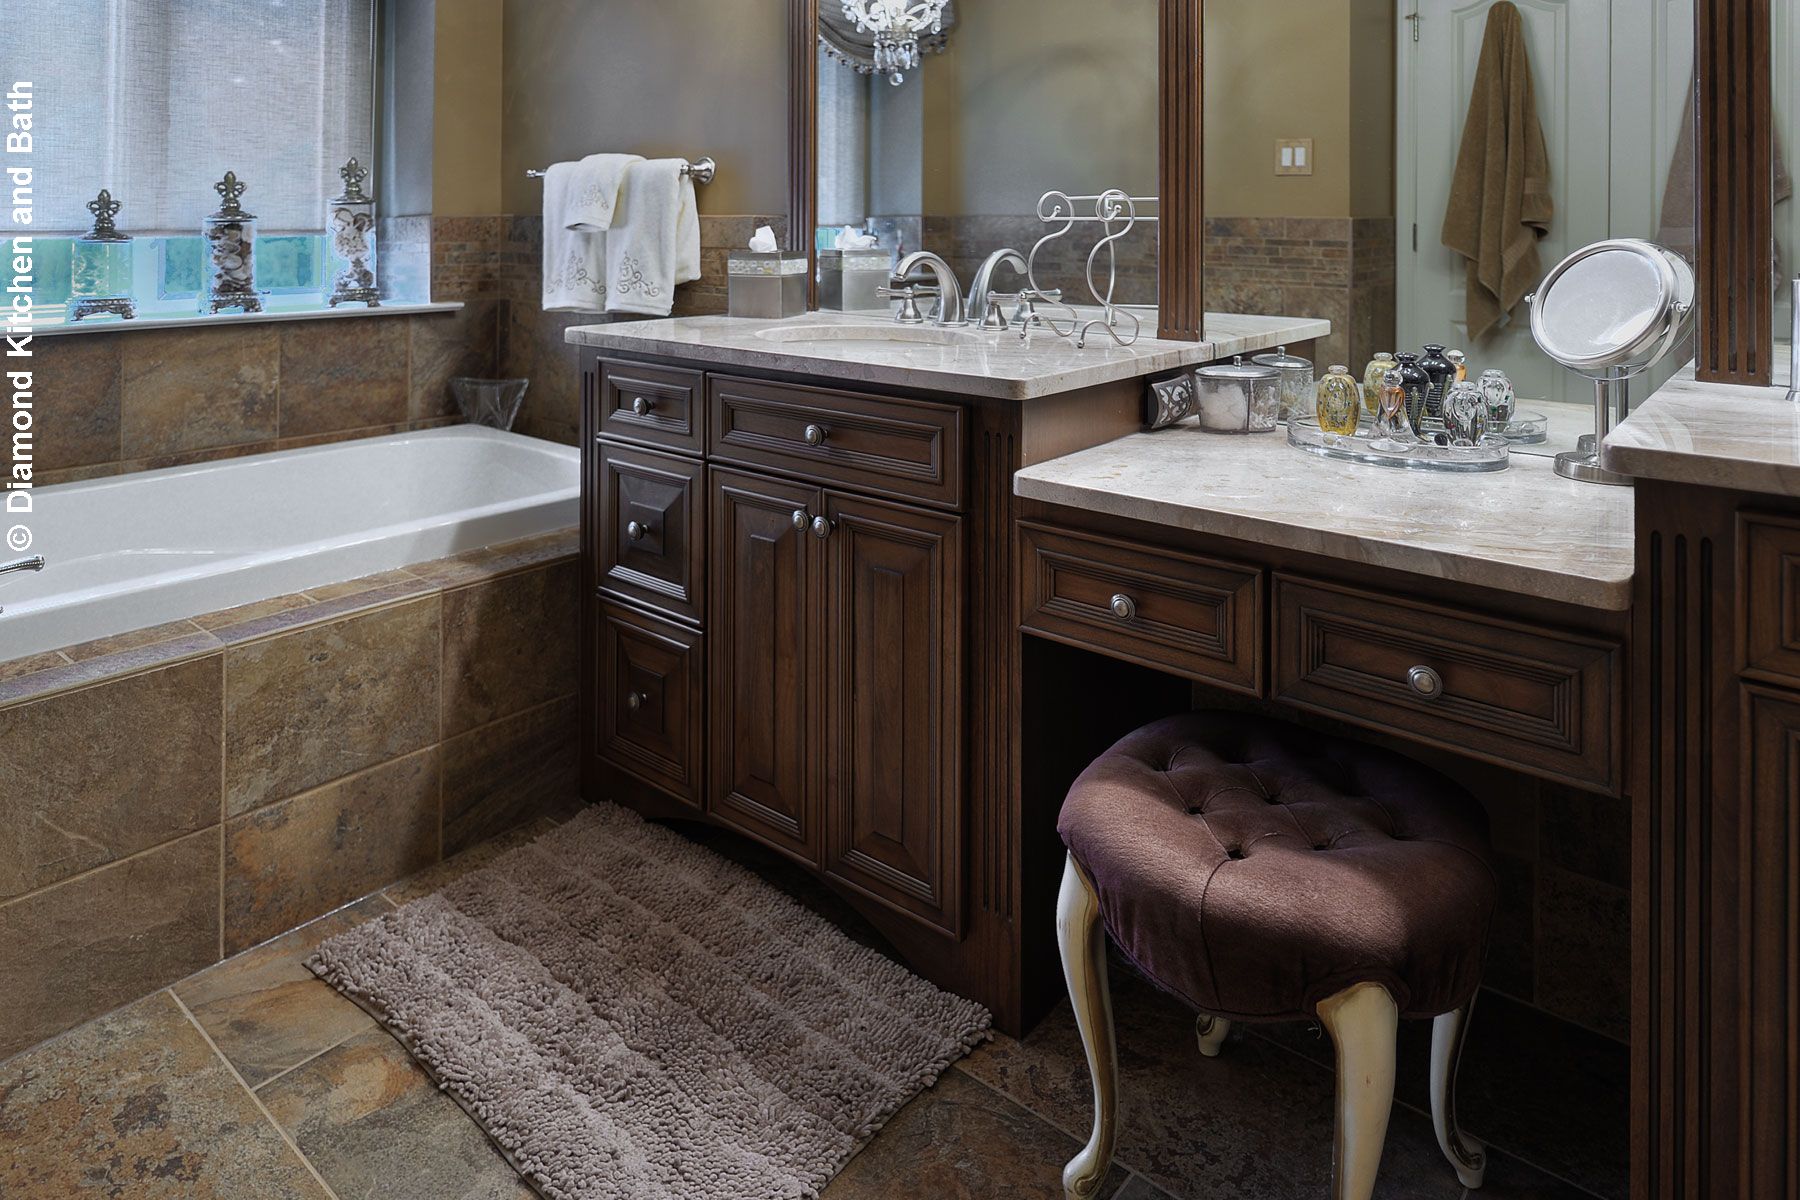 Bathroom Remodeling Virtual Tour in Feasterville, PA